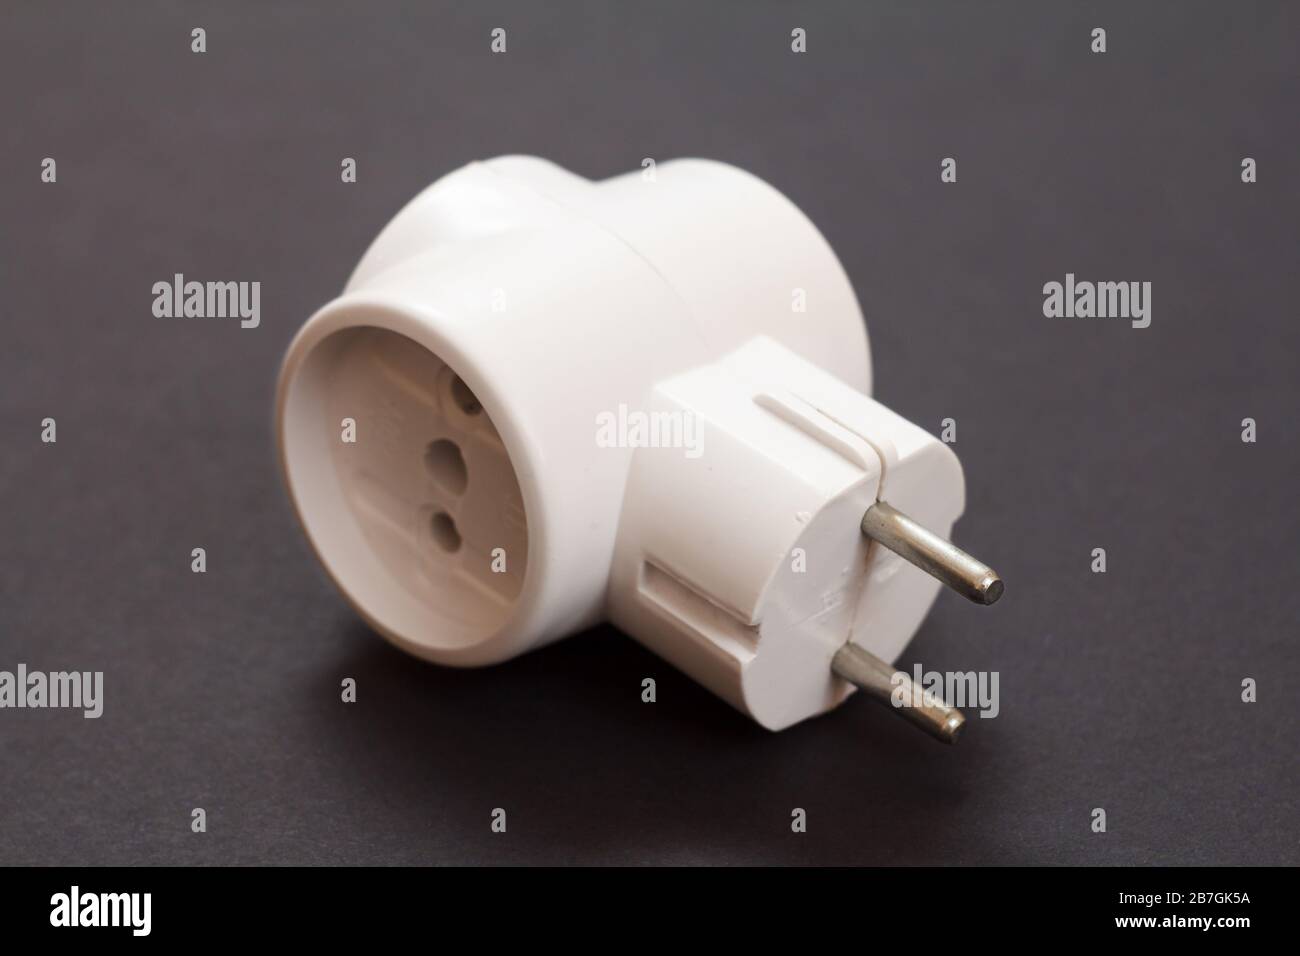 White plastic electrical tee connector with three sockets on a black background. Stock Photo